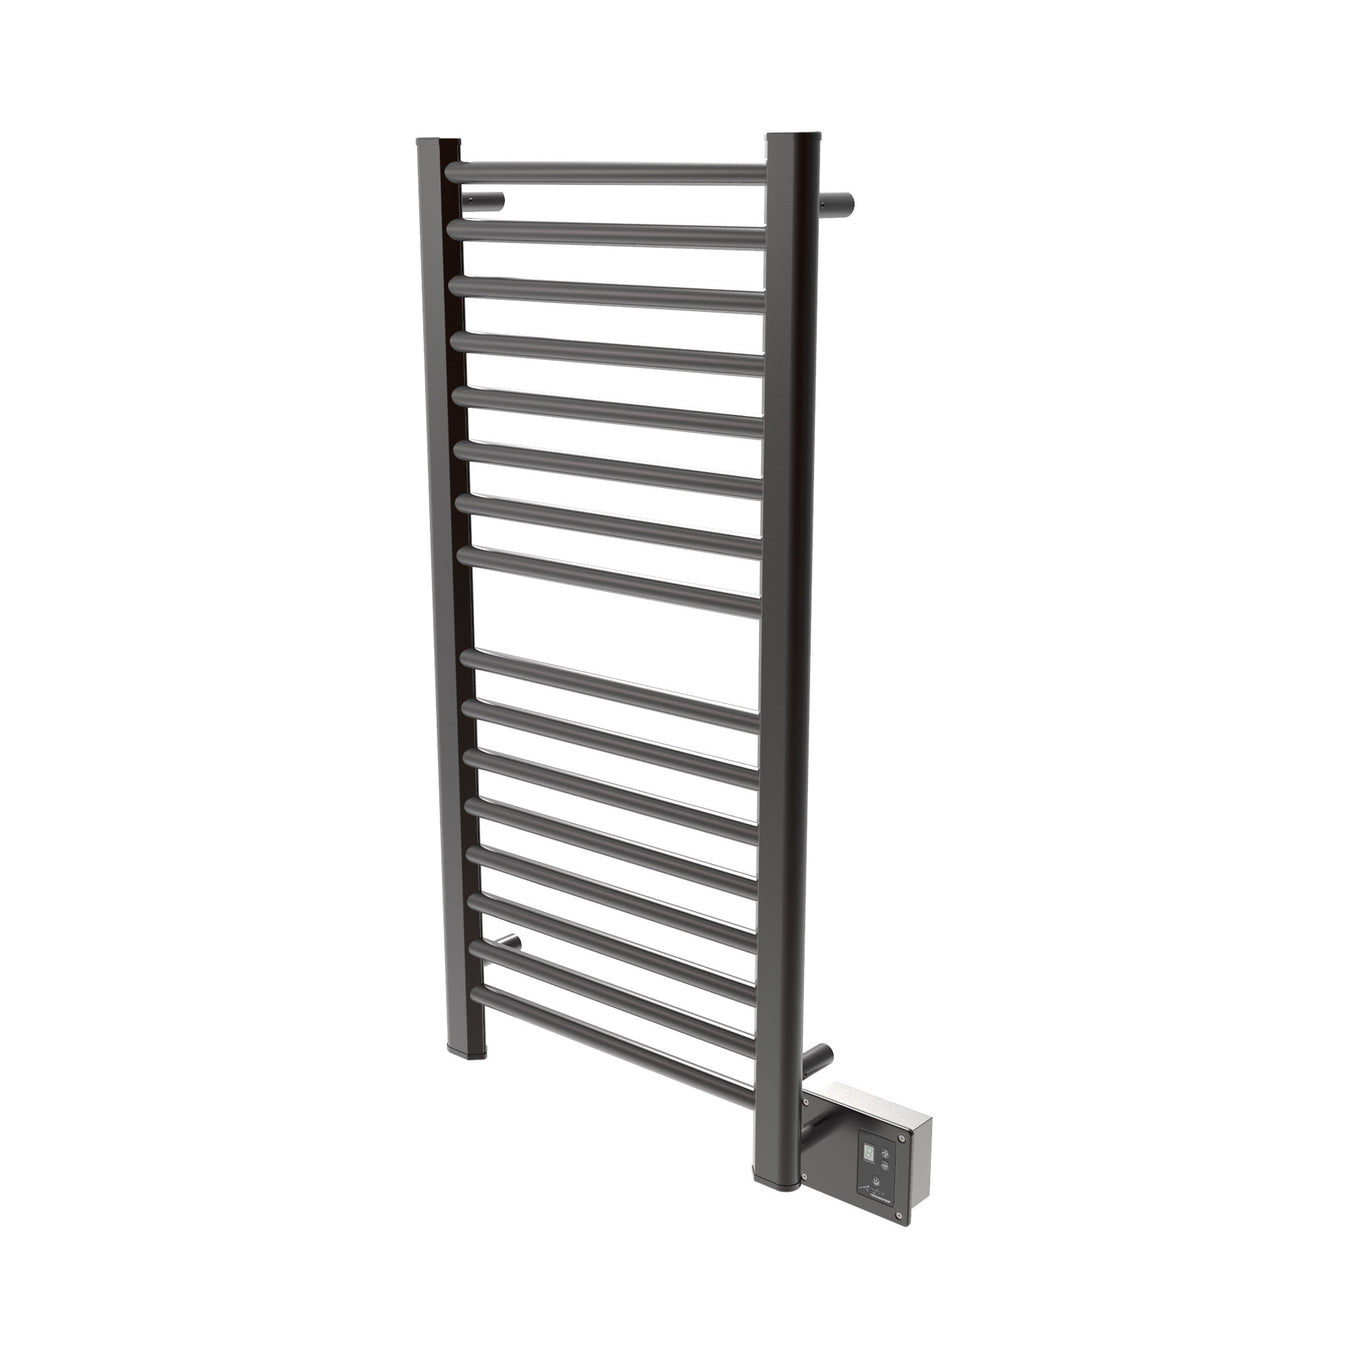 Amba Products Sirio Collection S2142 Towel Warmers